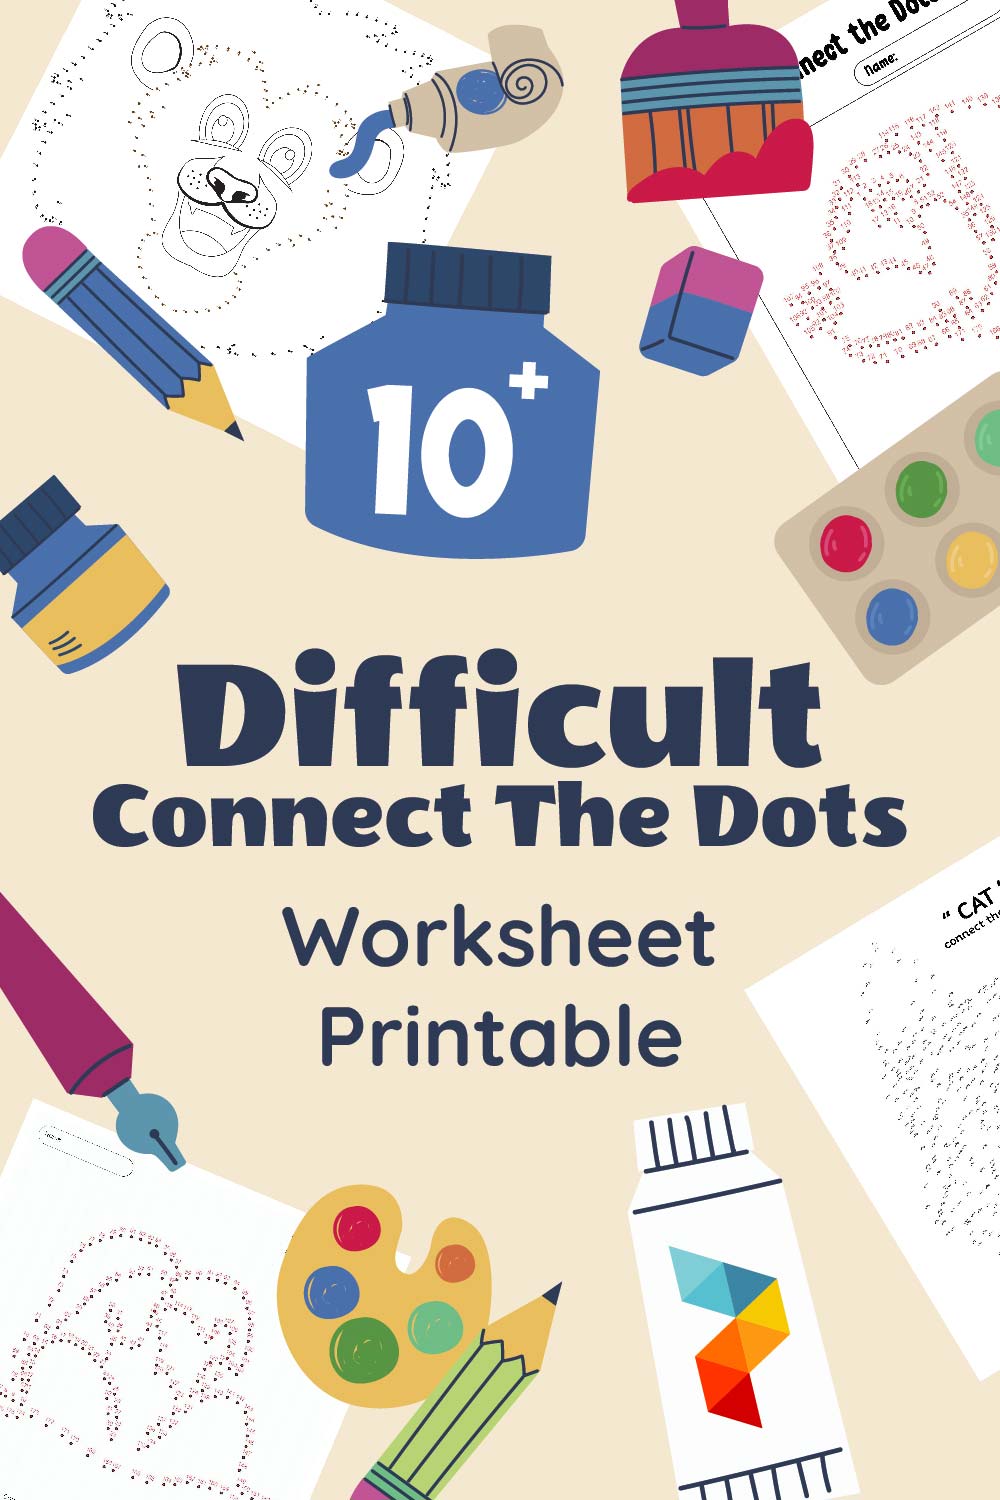 Difficult Connect The Dots Worksheet